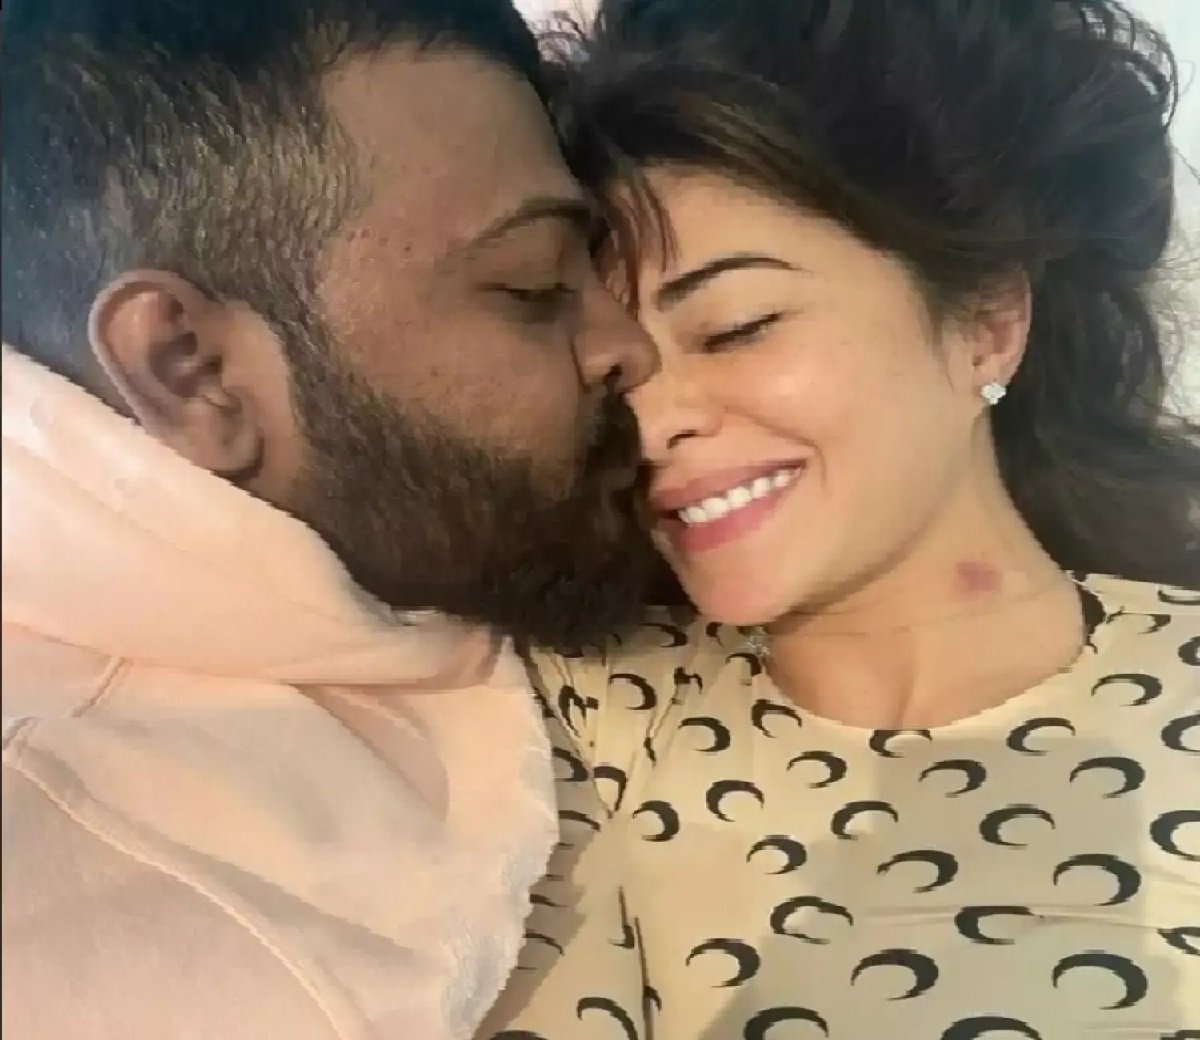 Actress Jacqueline Fernandez released statement after intimate photo went viral